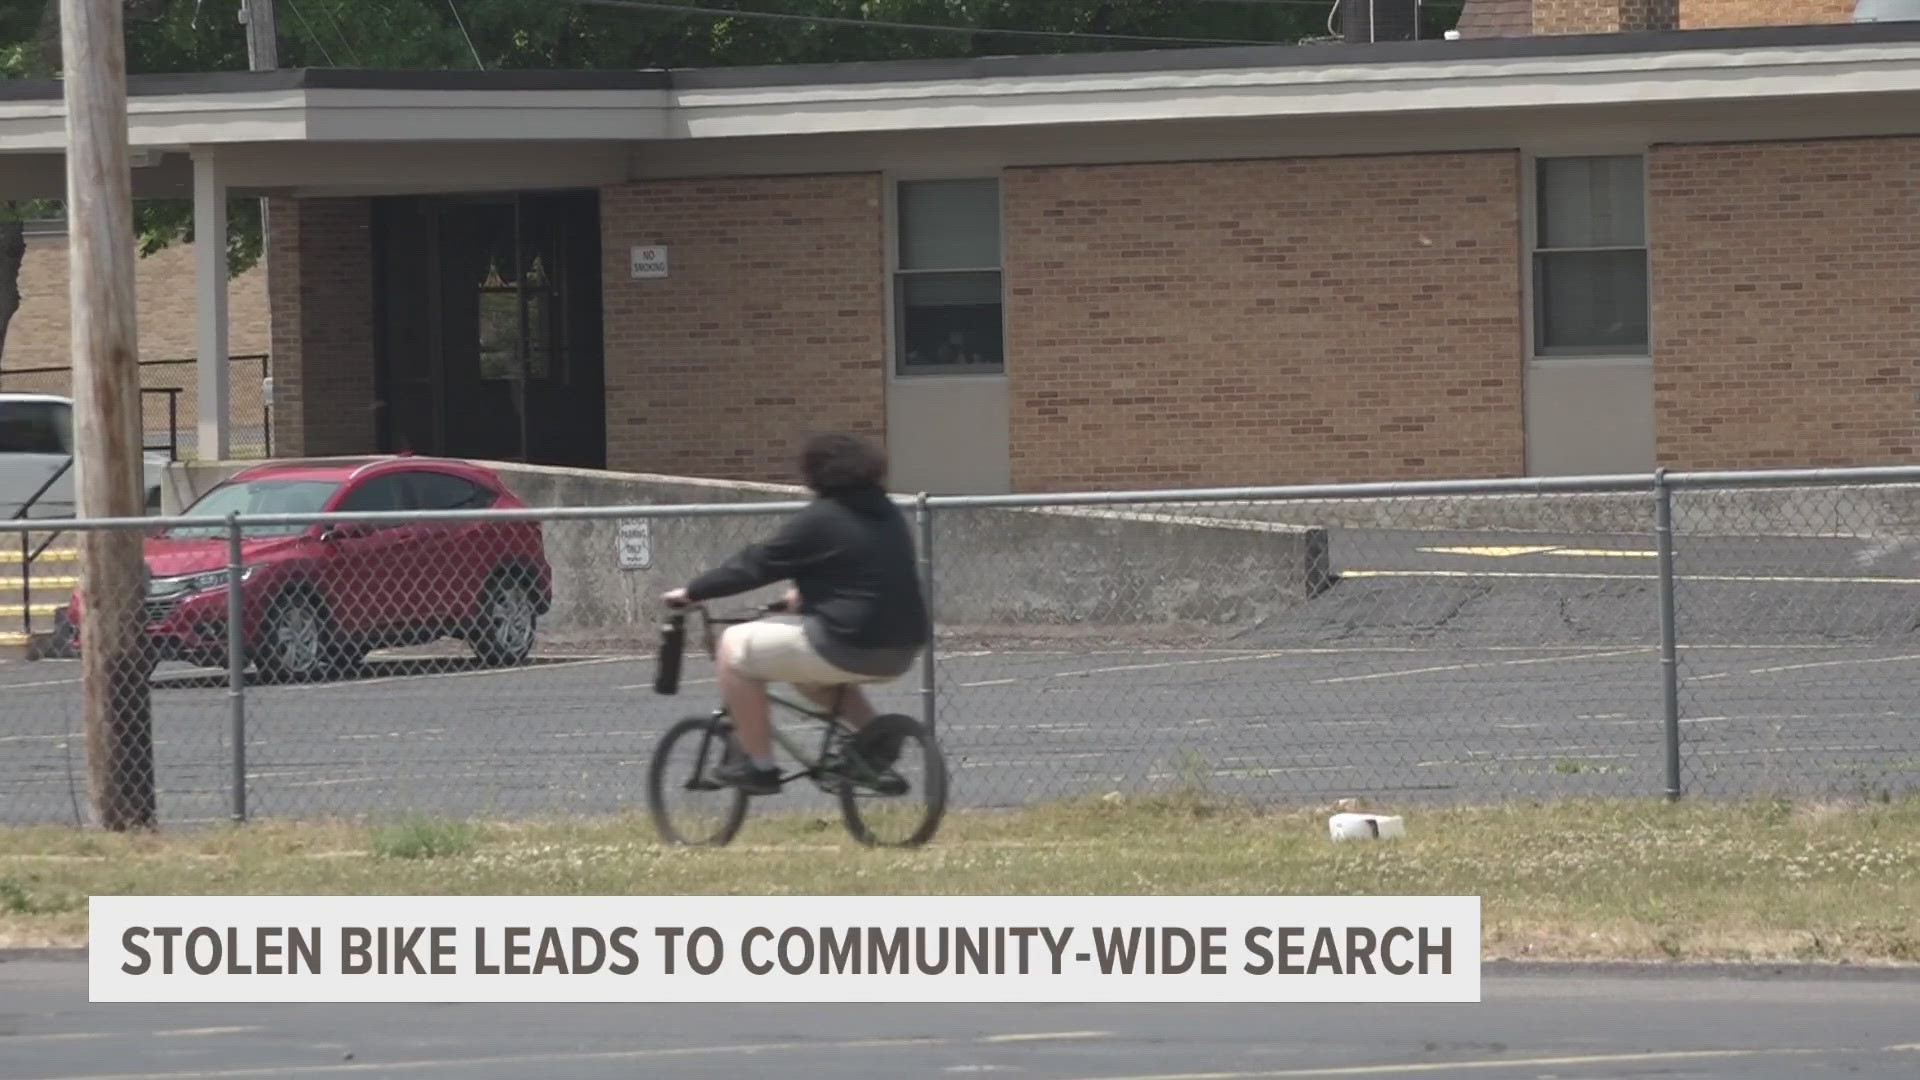 A missing bike had most of the people living in the town of Grant searching everywhere for it this week.